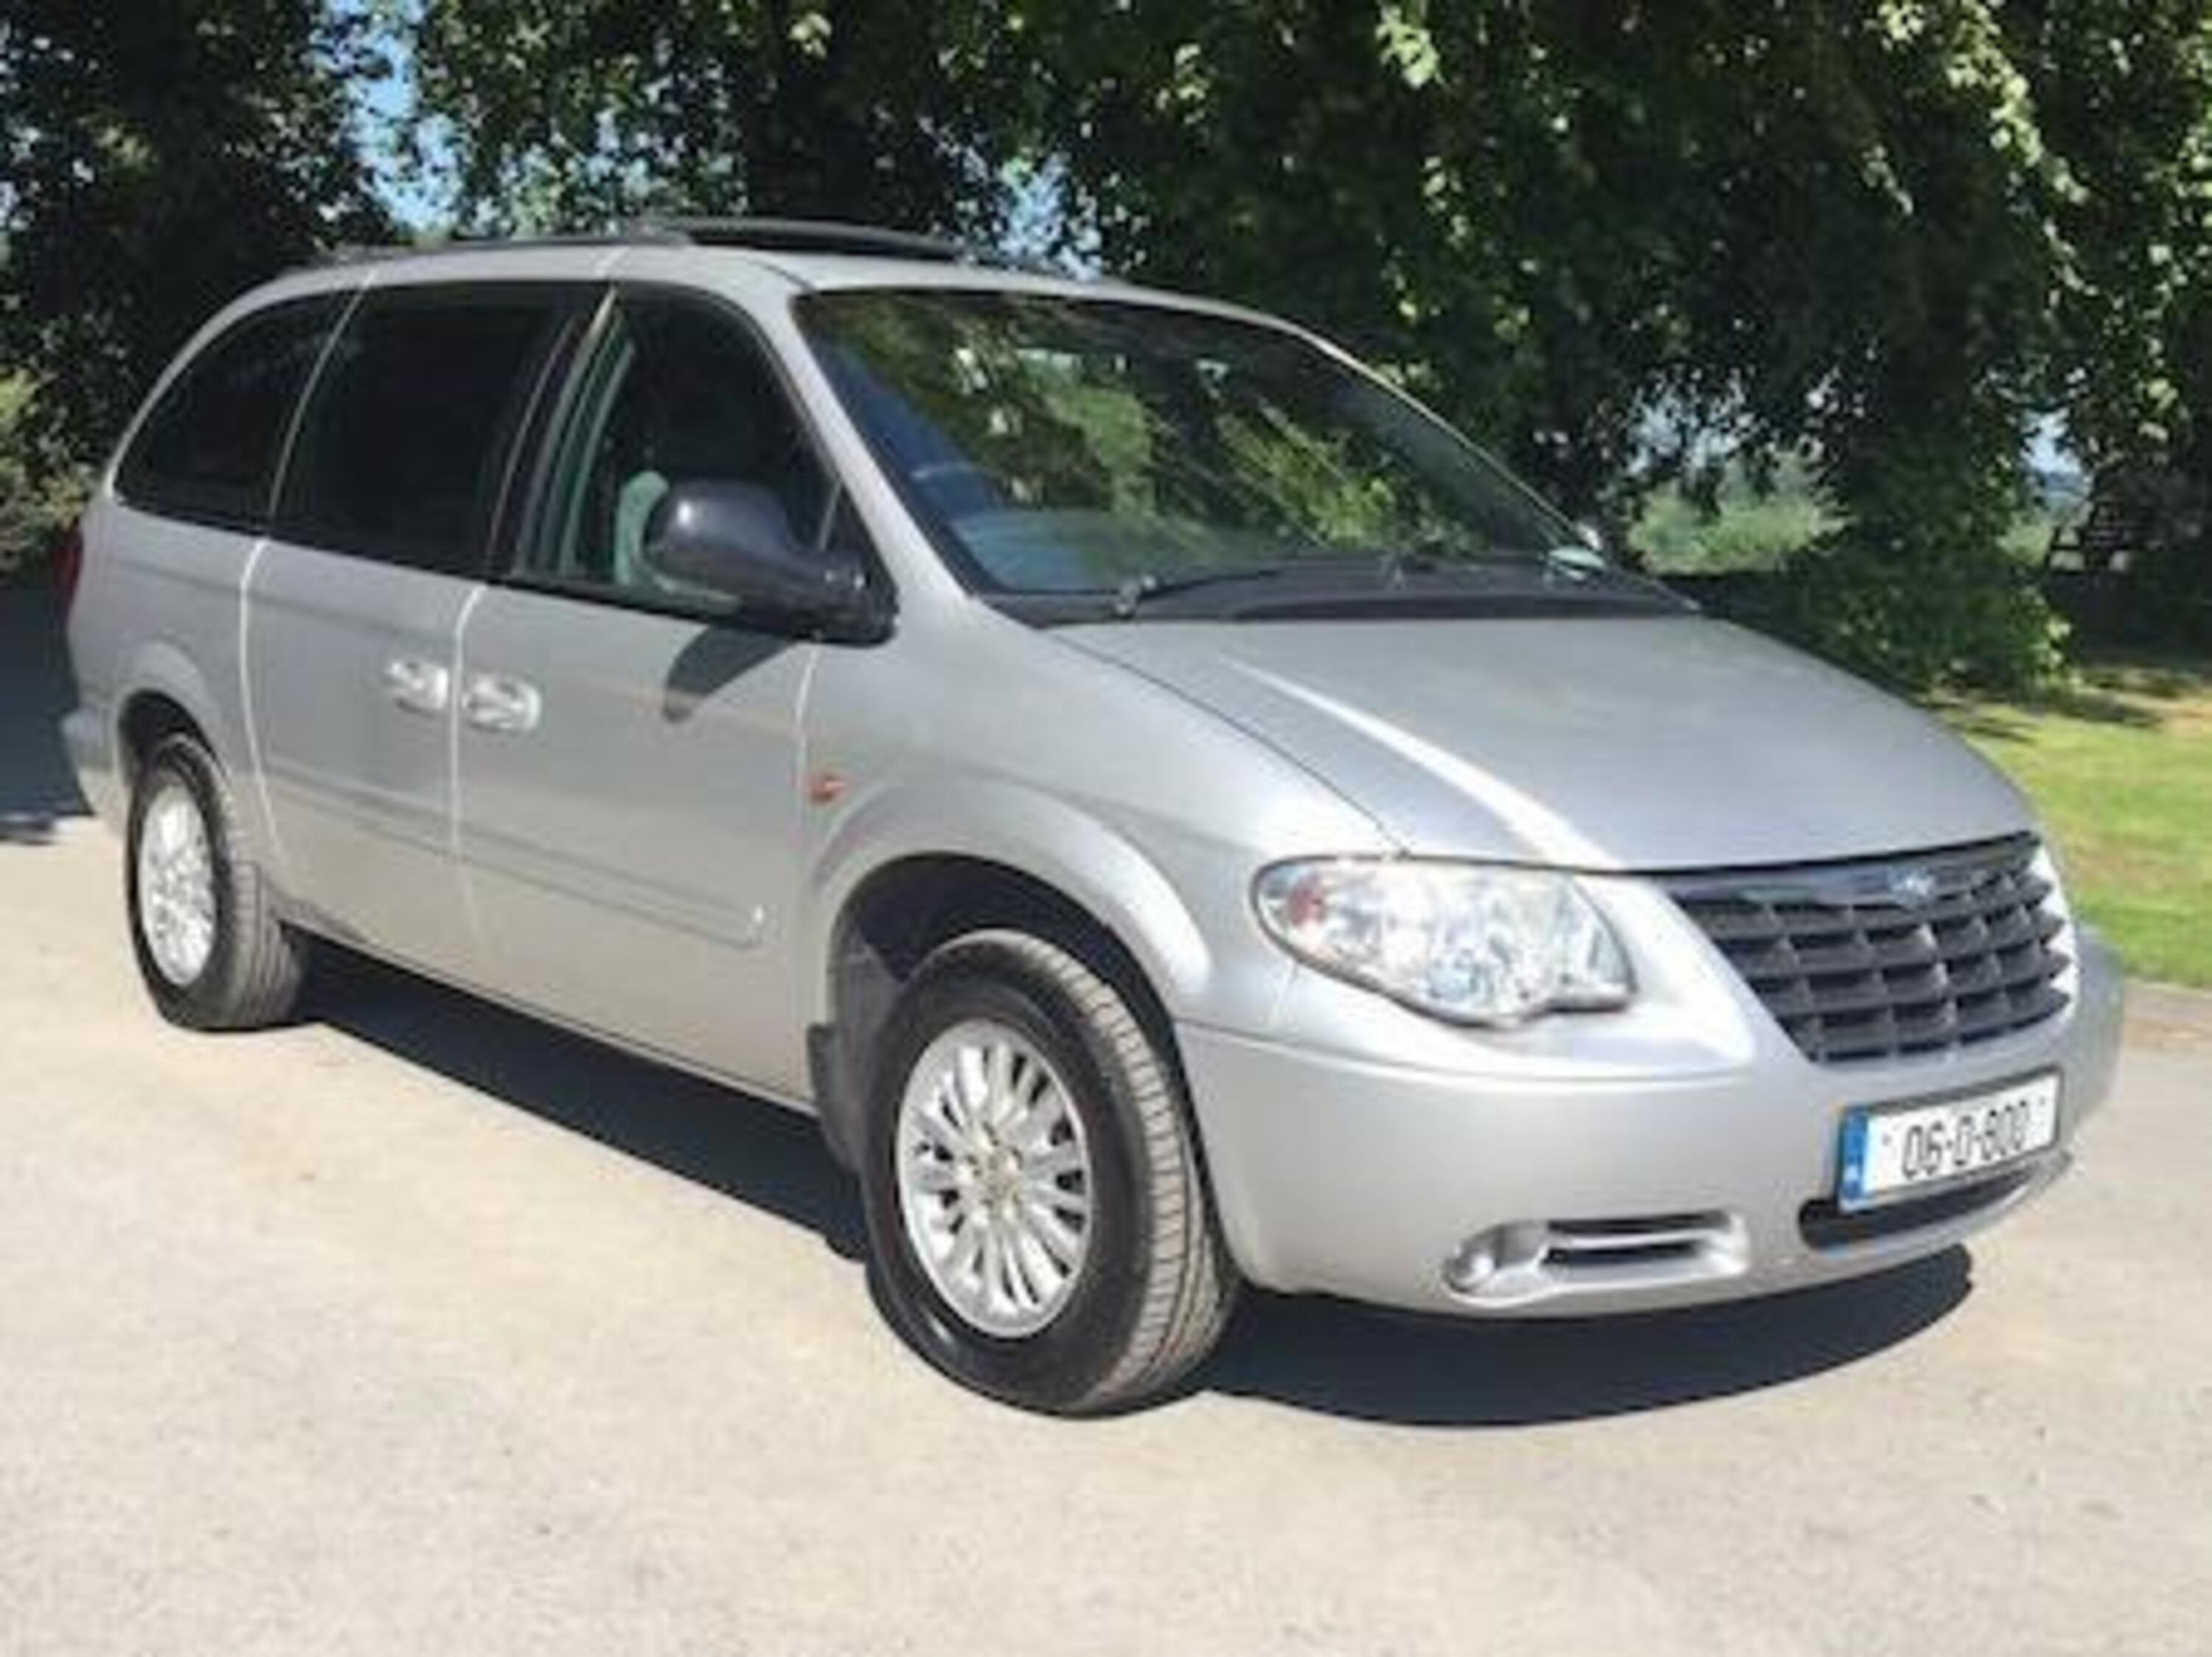 Chrysler Grand Voyager Grand Voyager 2.8 CRD cat WPC S.S. Auto